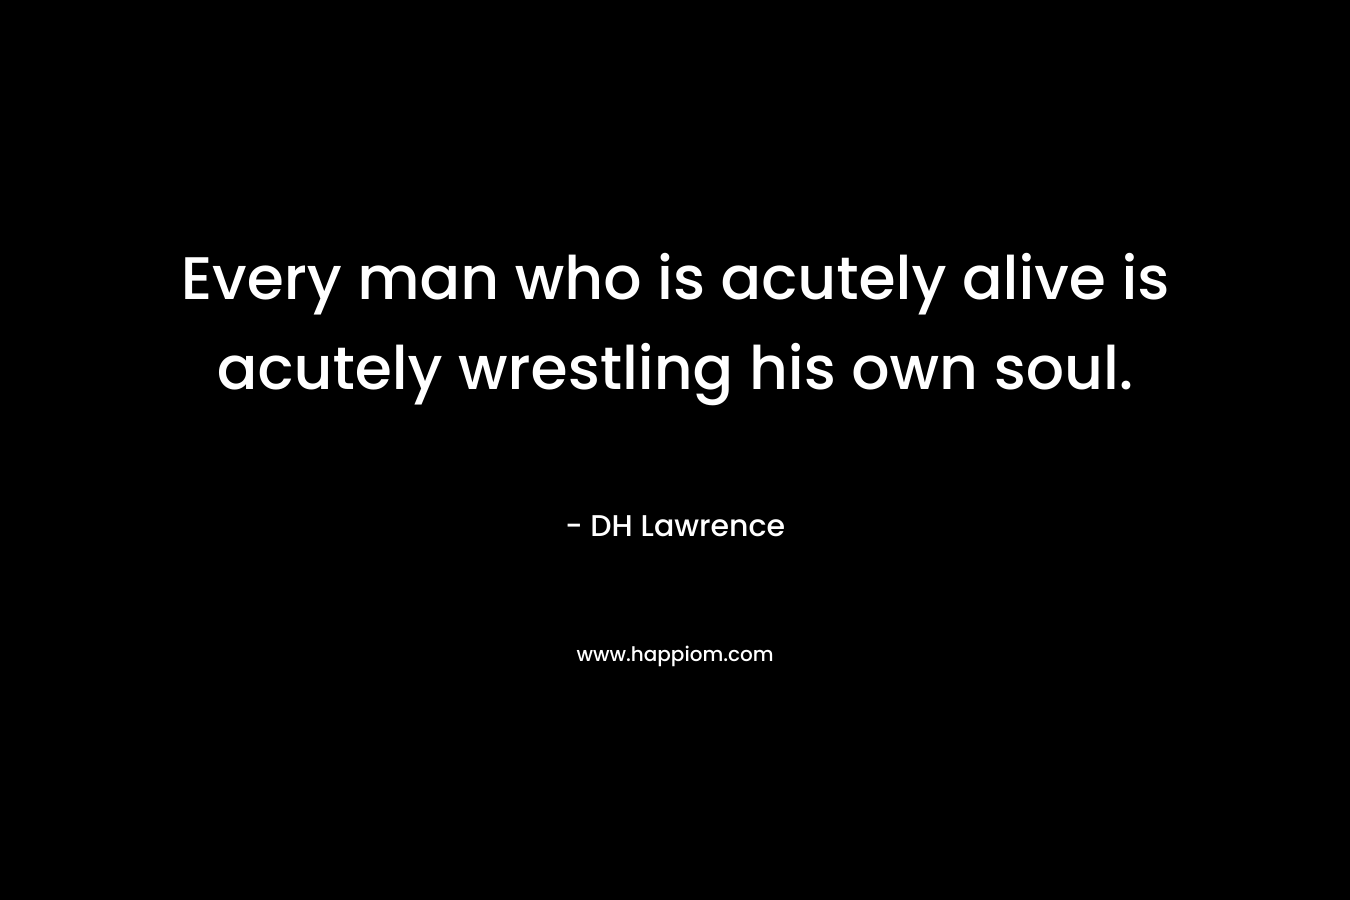 Every man who is acutely alive is acutely wrestling his own soul. – DH Lawrence